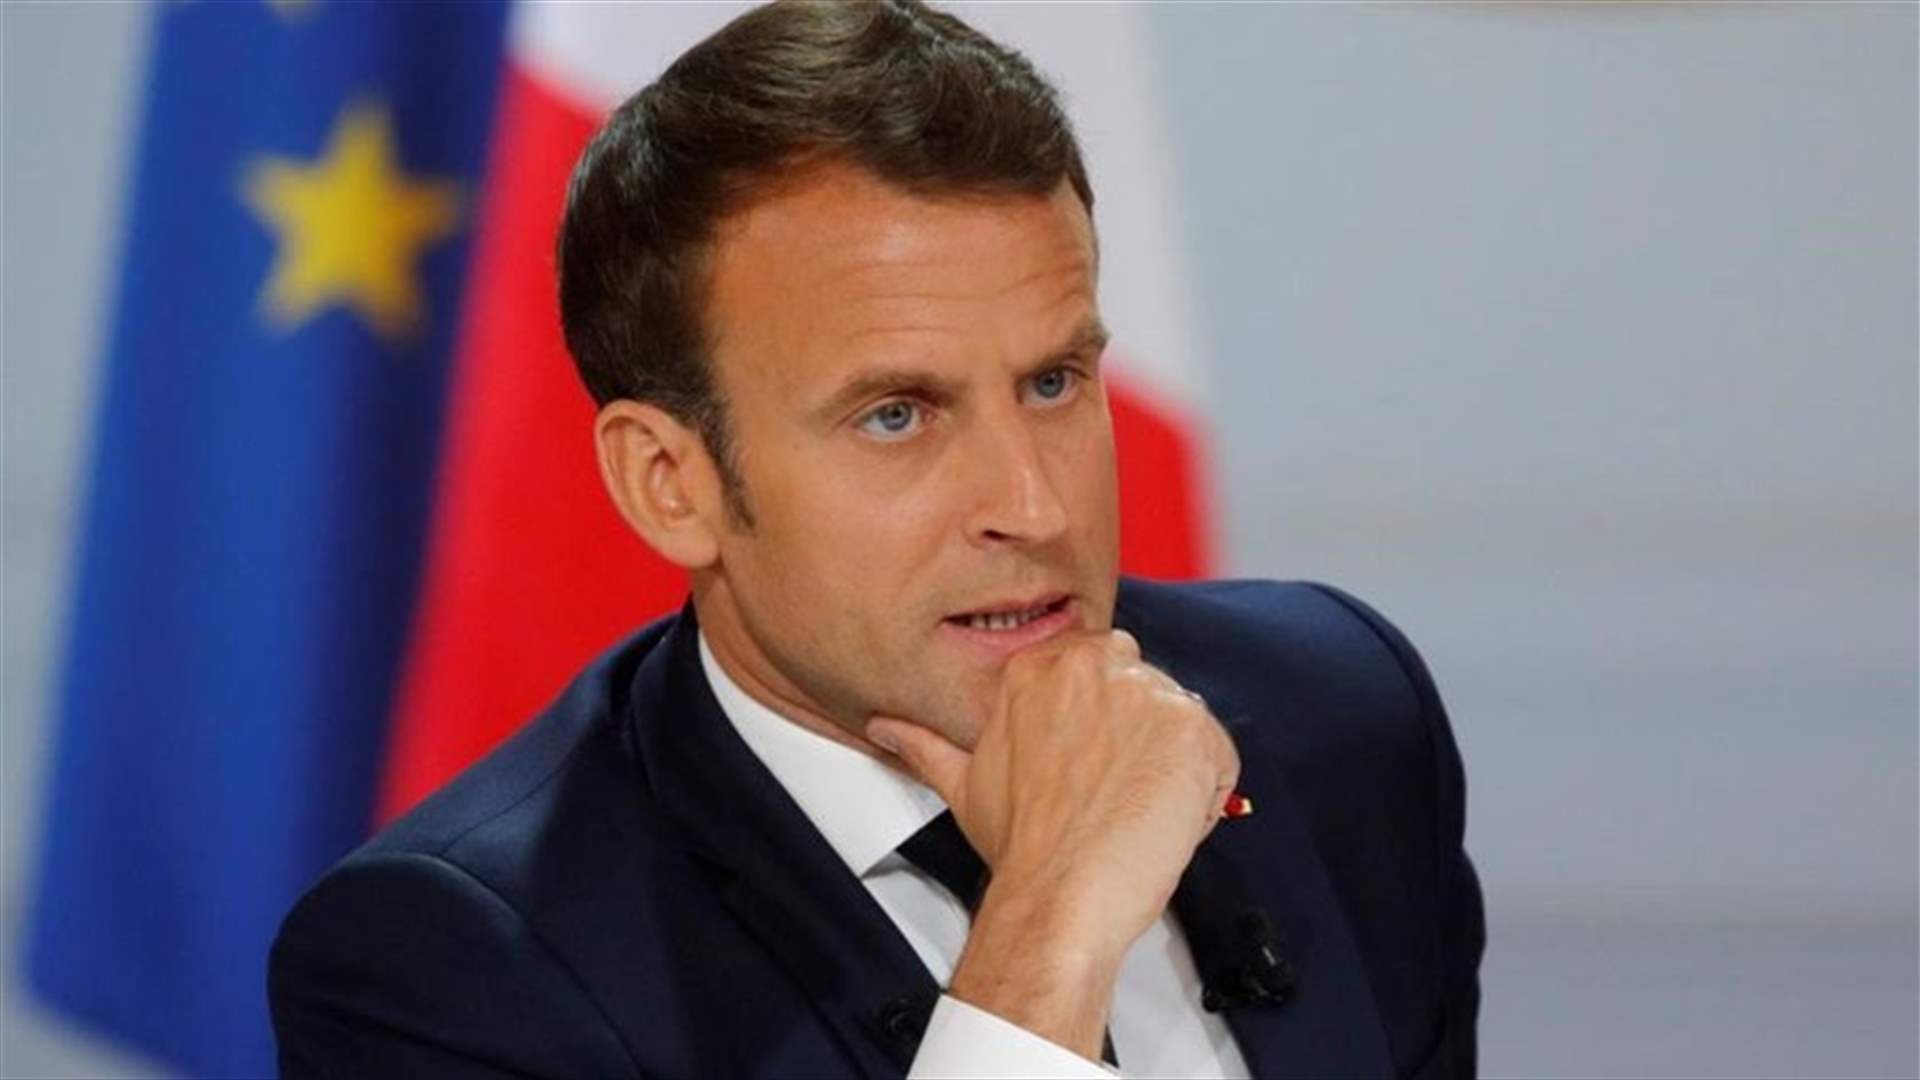 Time for Iran to take steps to defuse tensions - Macron